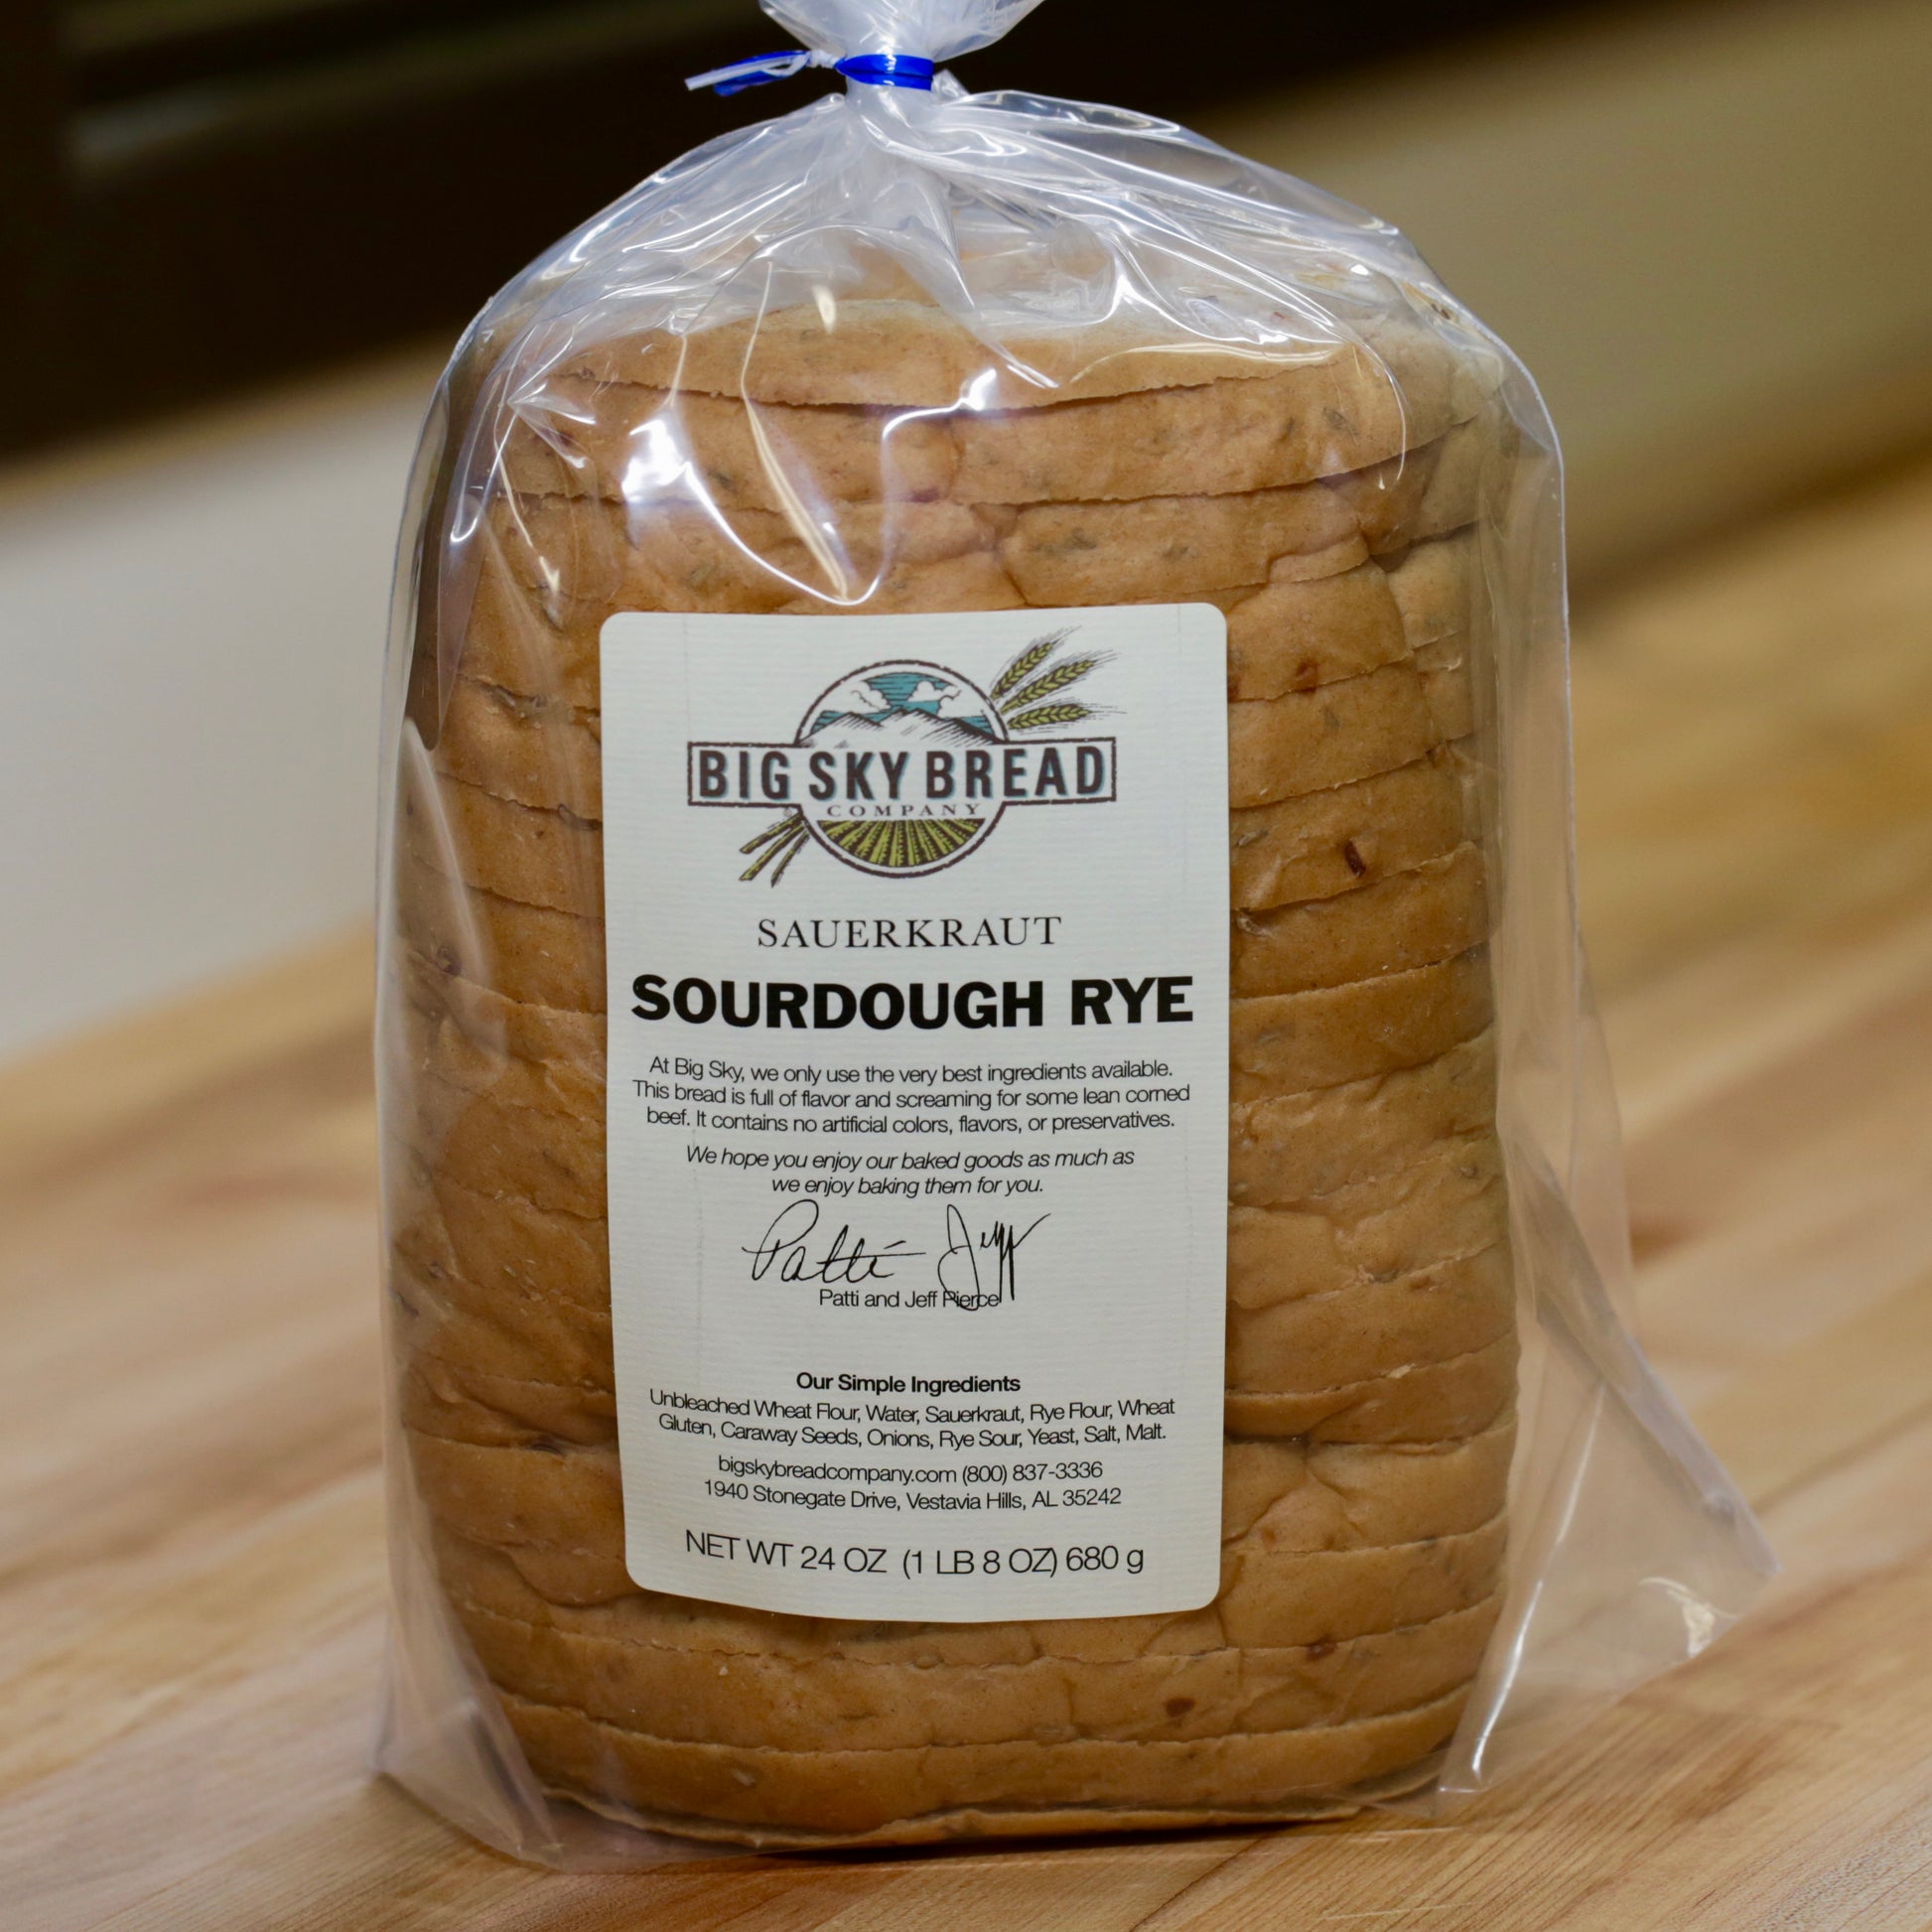 Big Sky Bread Company Sauerkraut Sourdough Rye Bread. Screaming for some lean corned beef! This loaf has so much flavor... it's loaded with onions, caraway seeds, and sauerkraut.